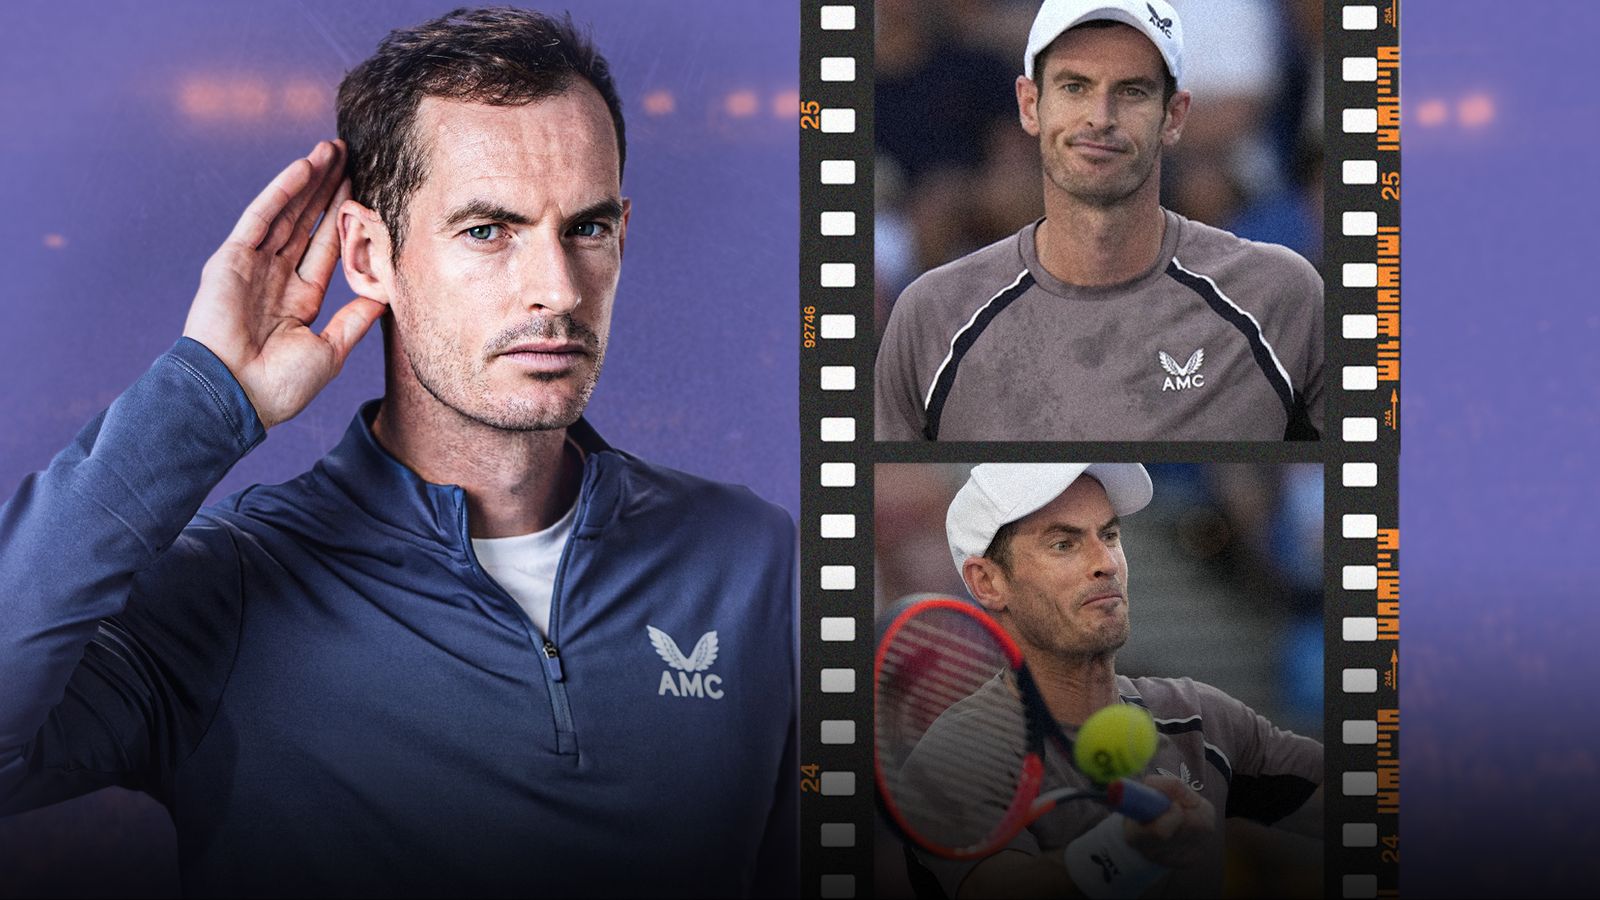 Andy Murray: What’s next for the two-time Wimbledon champion? When can you see him on Sky Sports Tennis?